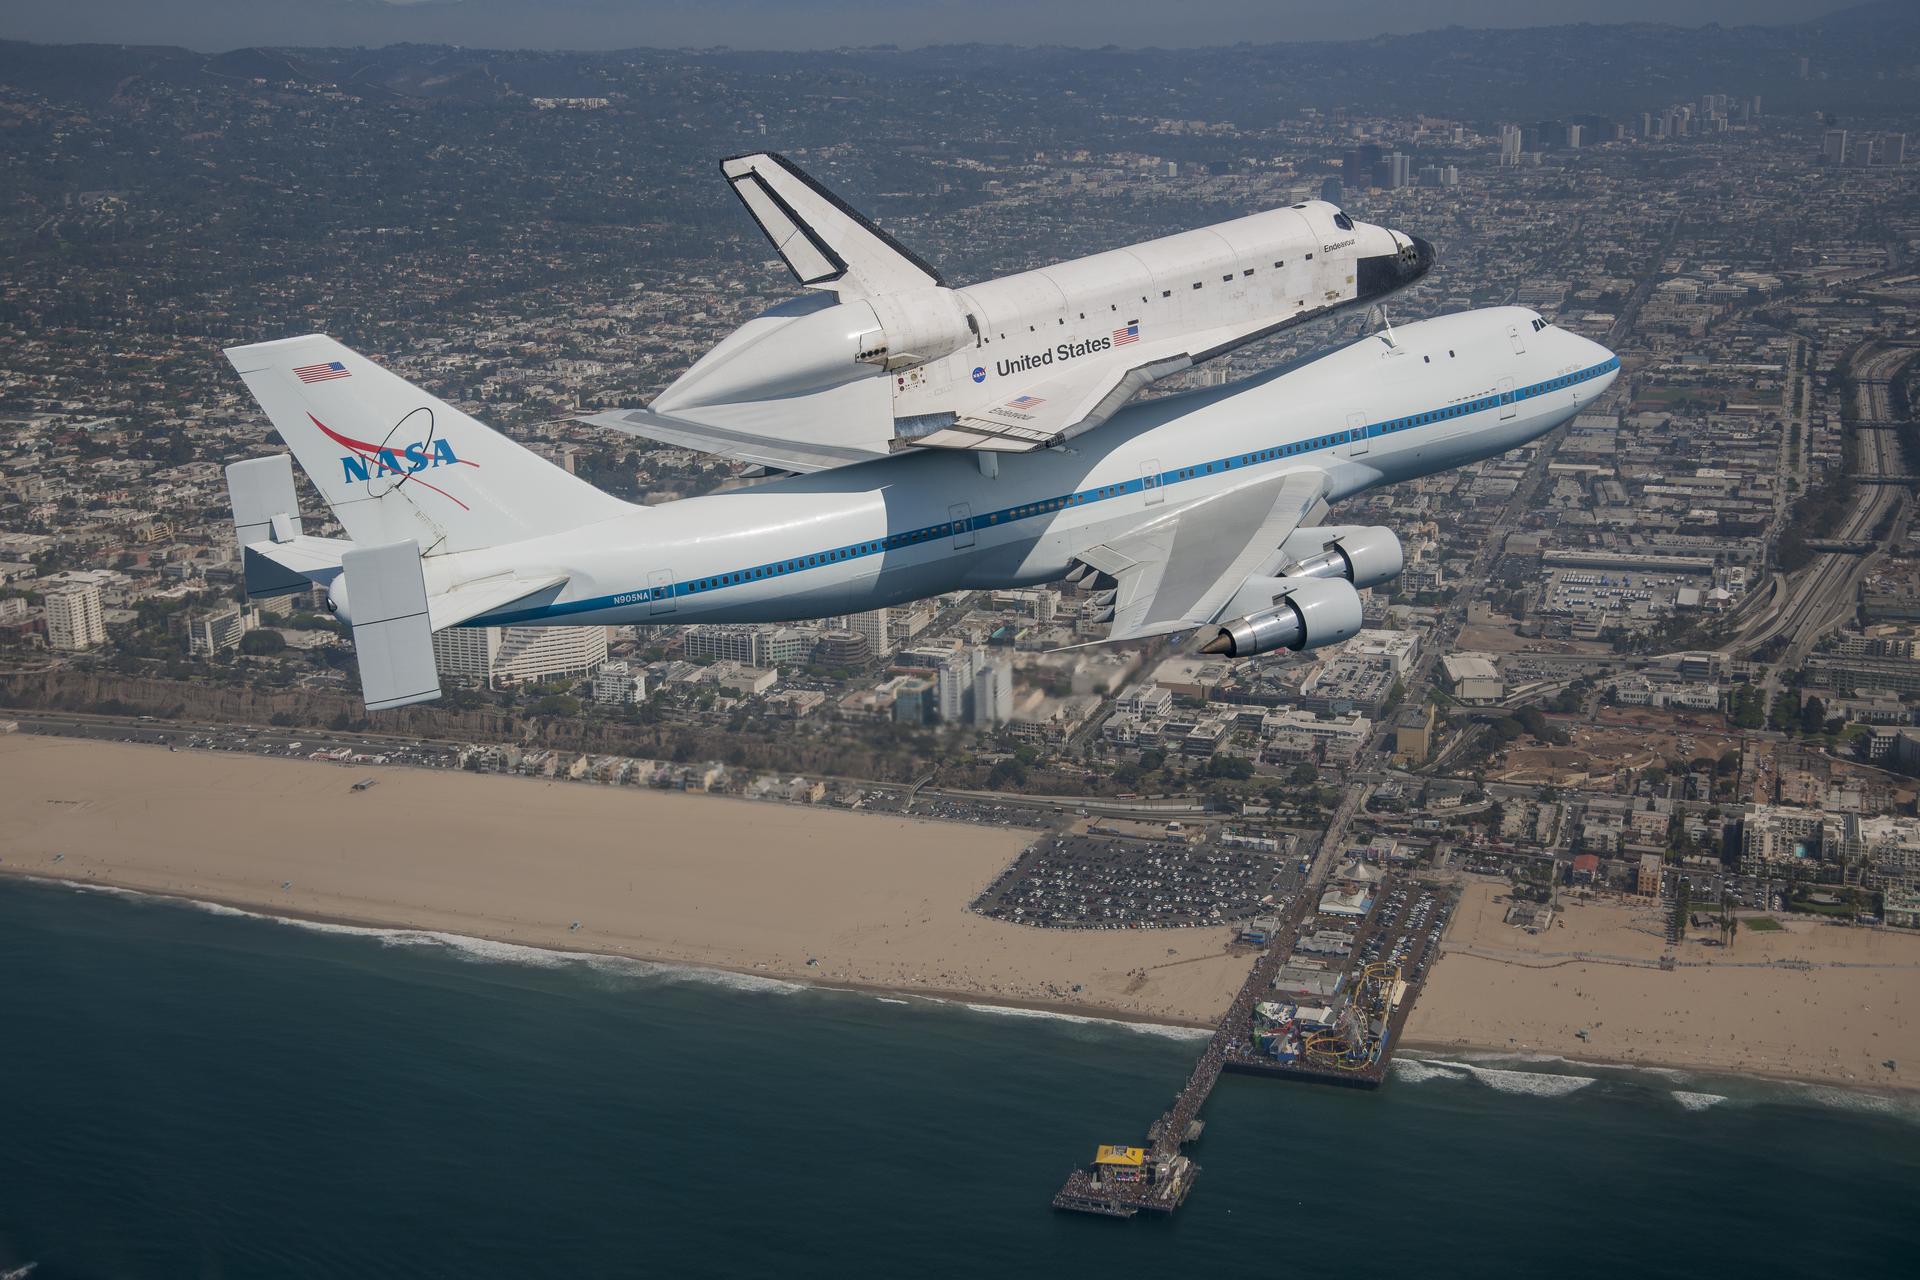 Space shuttle Endeavour and its host NASA 747 Shuttle Carrier Aircraft